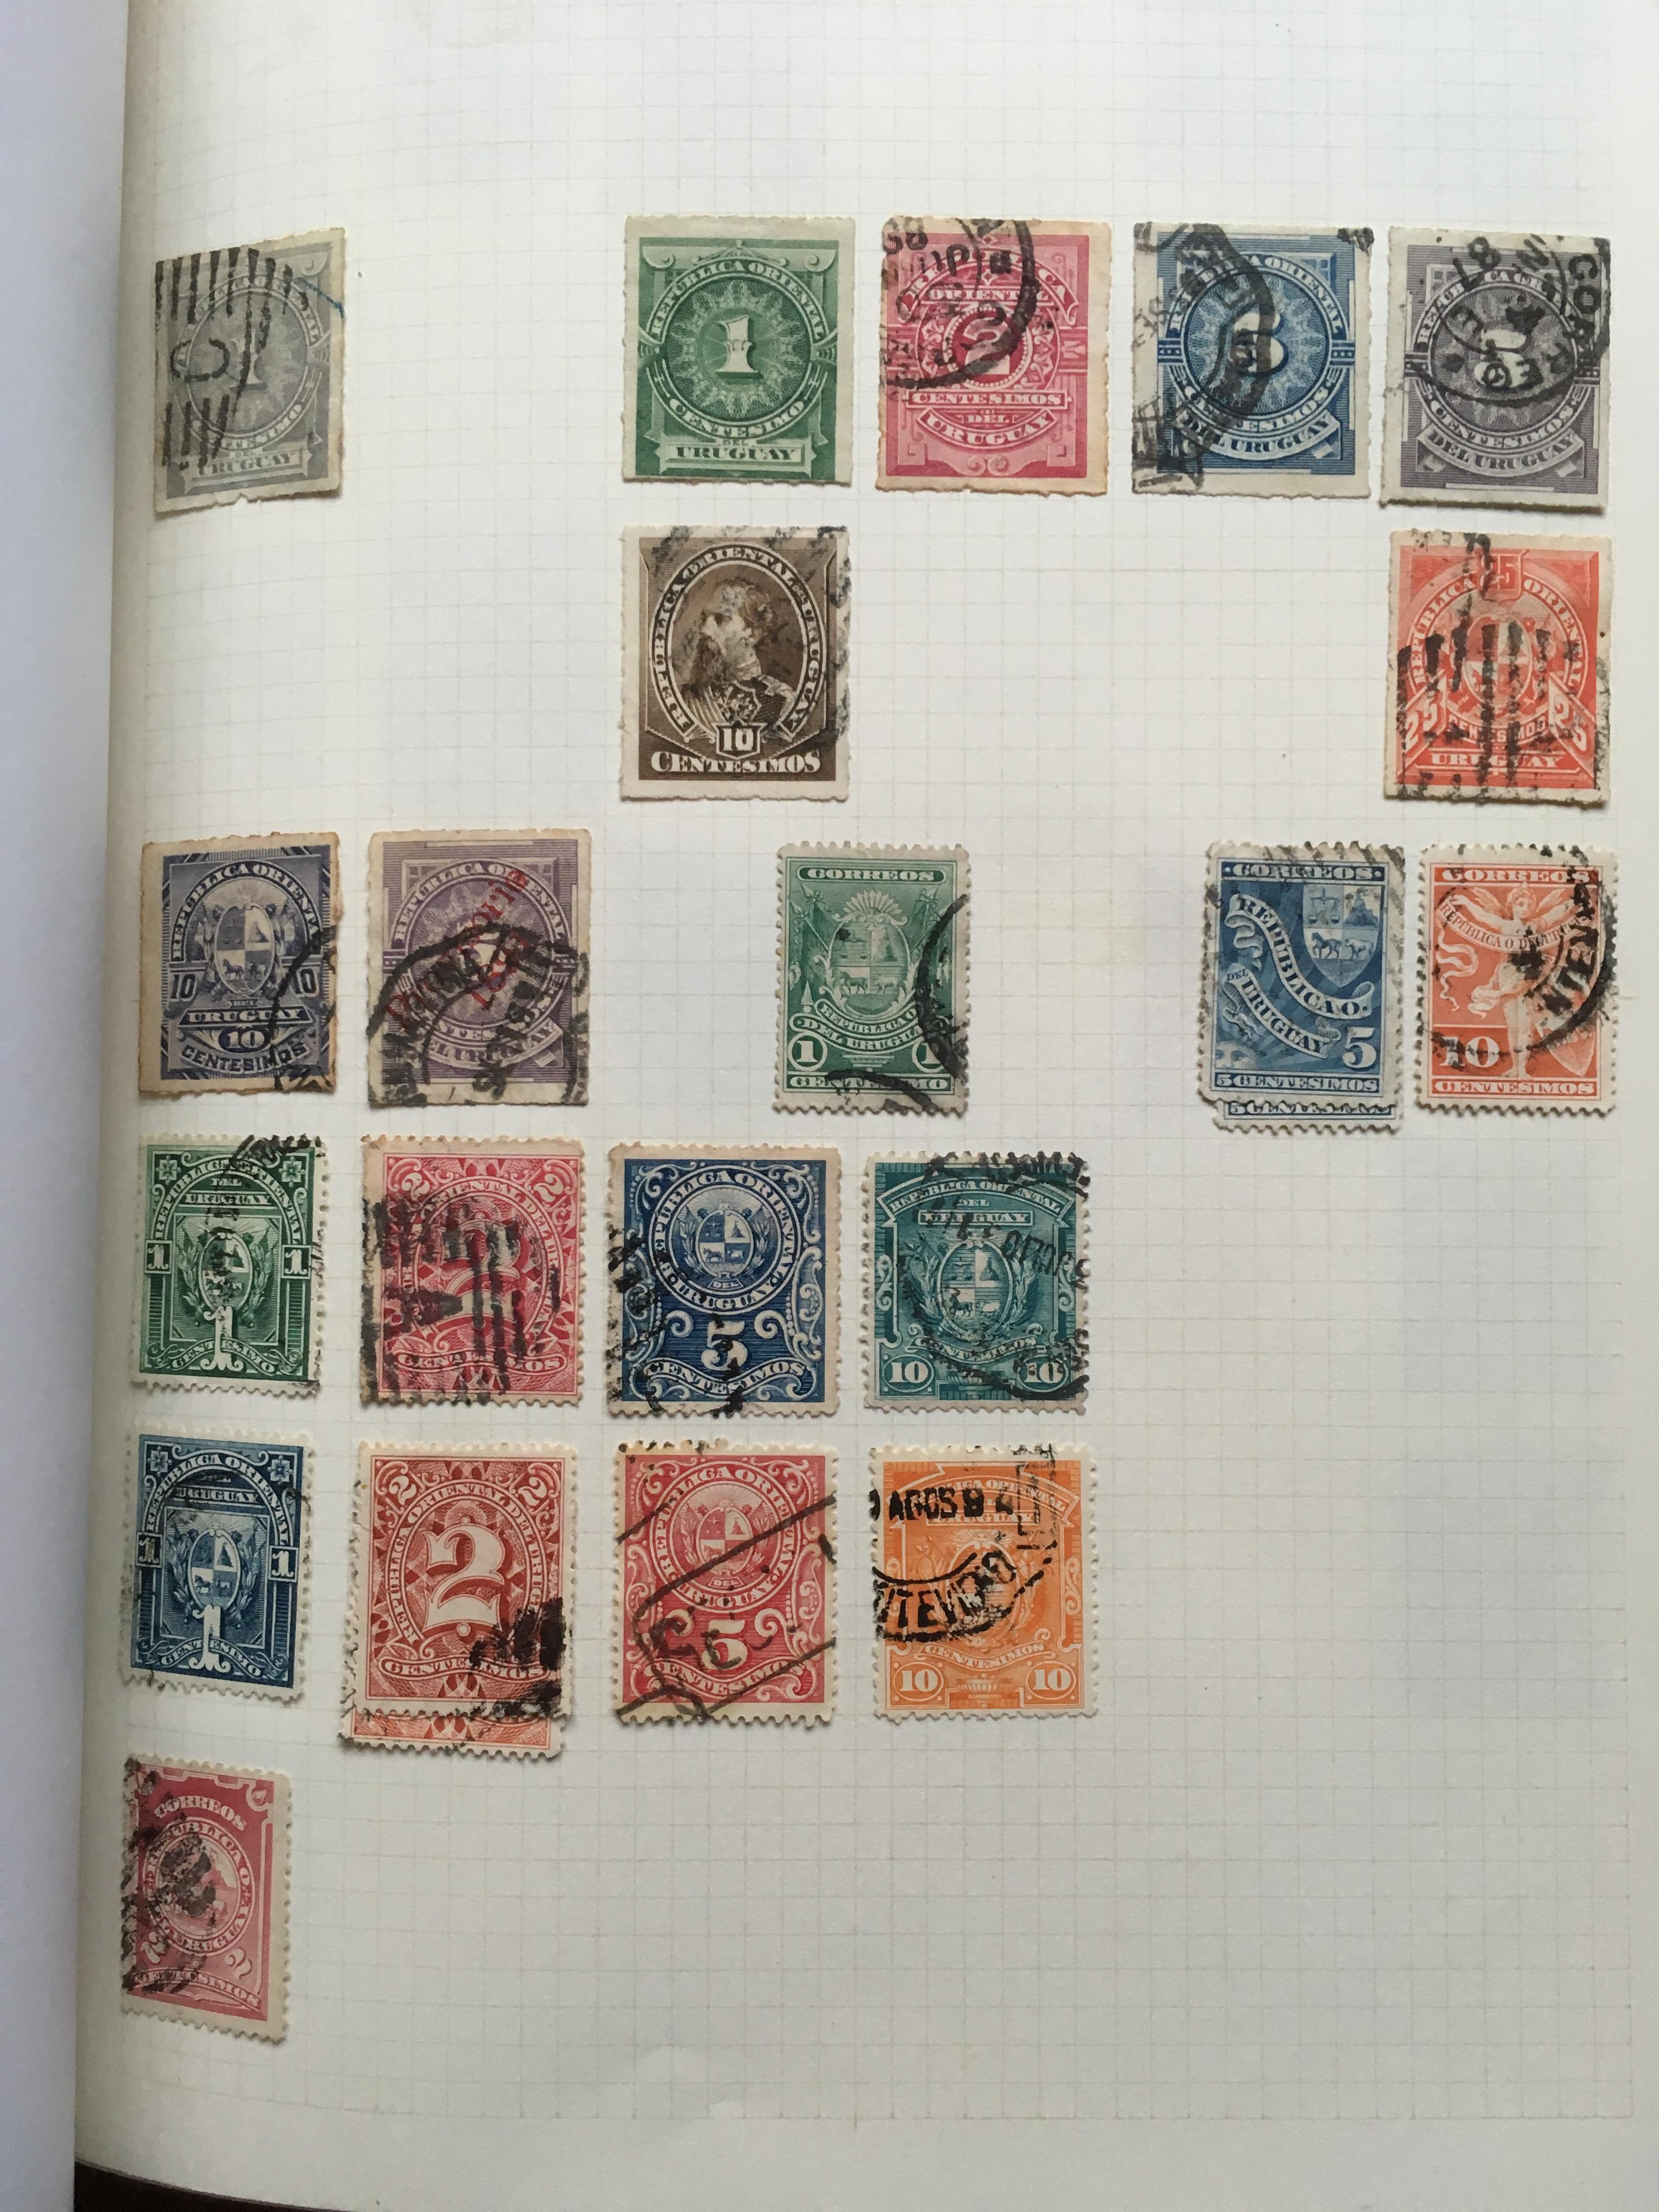 TWO ALBUMS WITH COLLECTIONS OF EUROPE AND LATIN AMERICA WITH HAITI, PERU, VENEZUELA, - Image 11 of 27